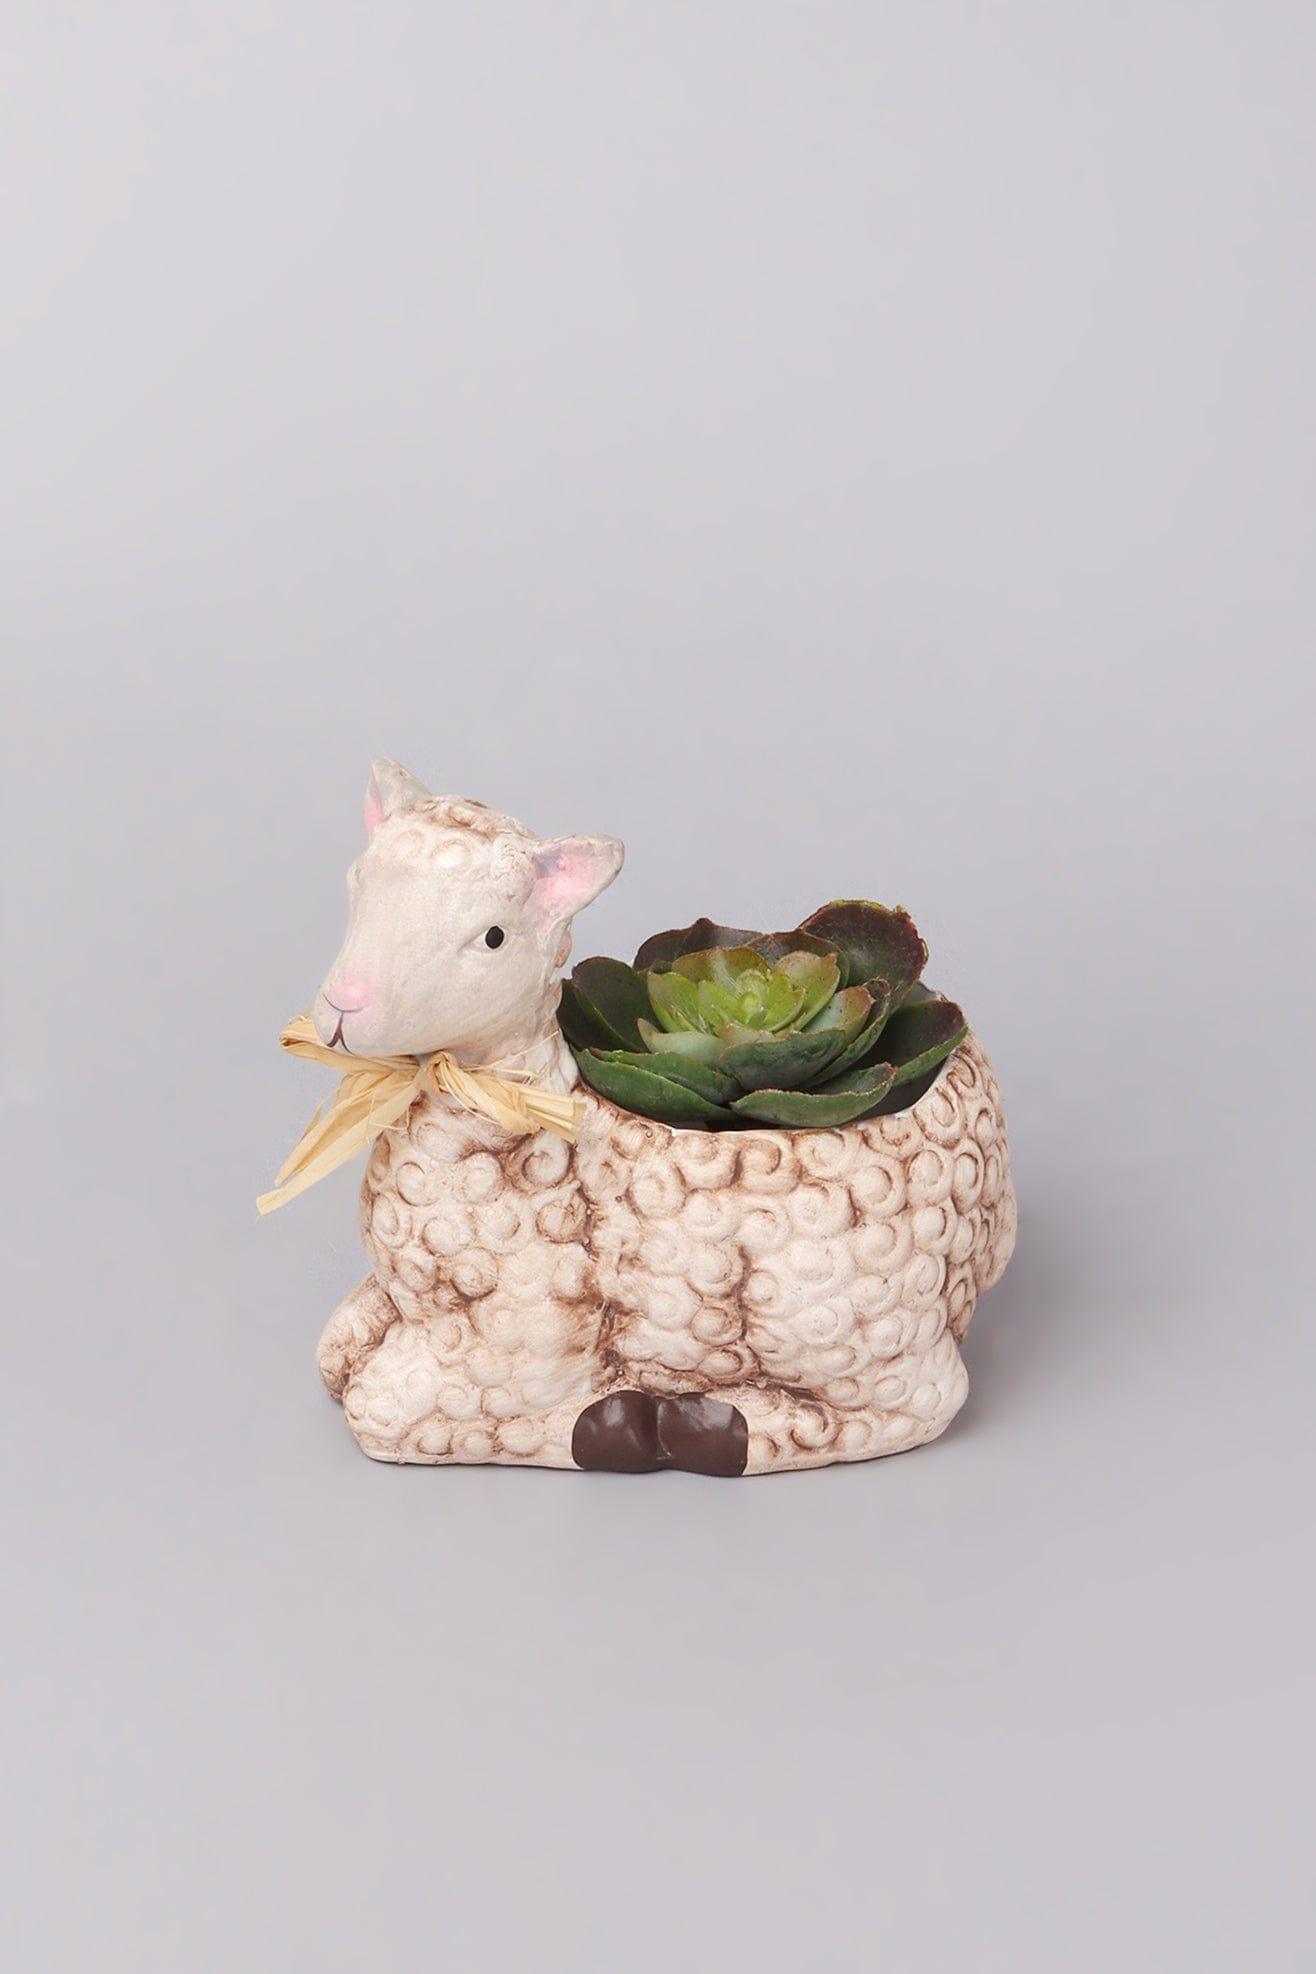 G Decor planters and vases Brown Cute Small Ceramic Sheep Planter